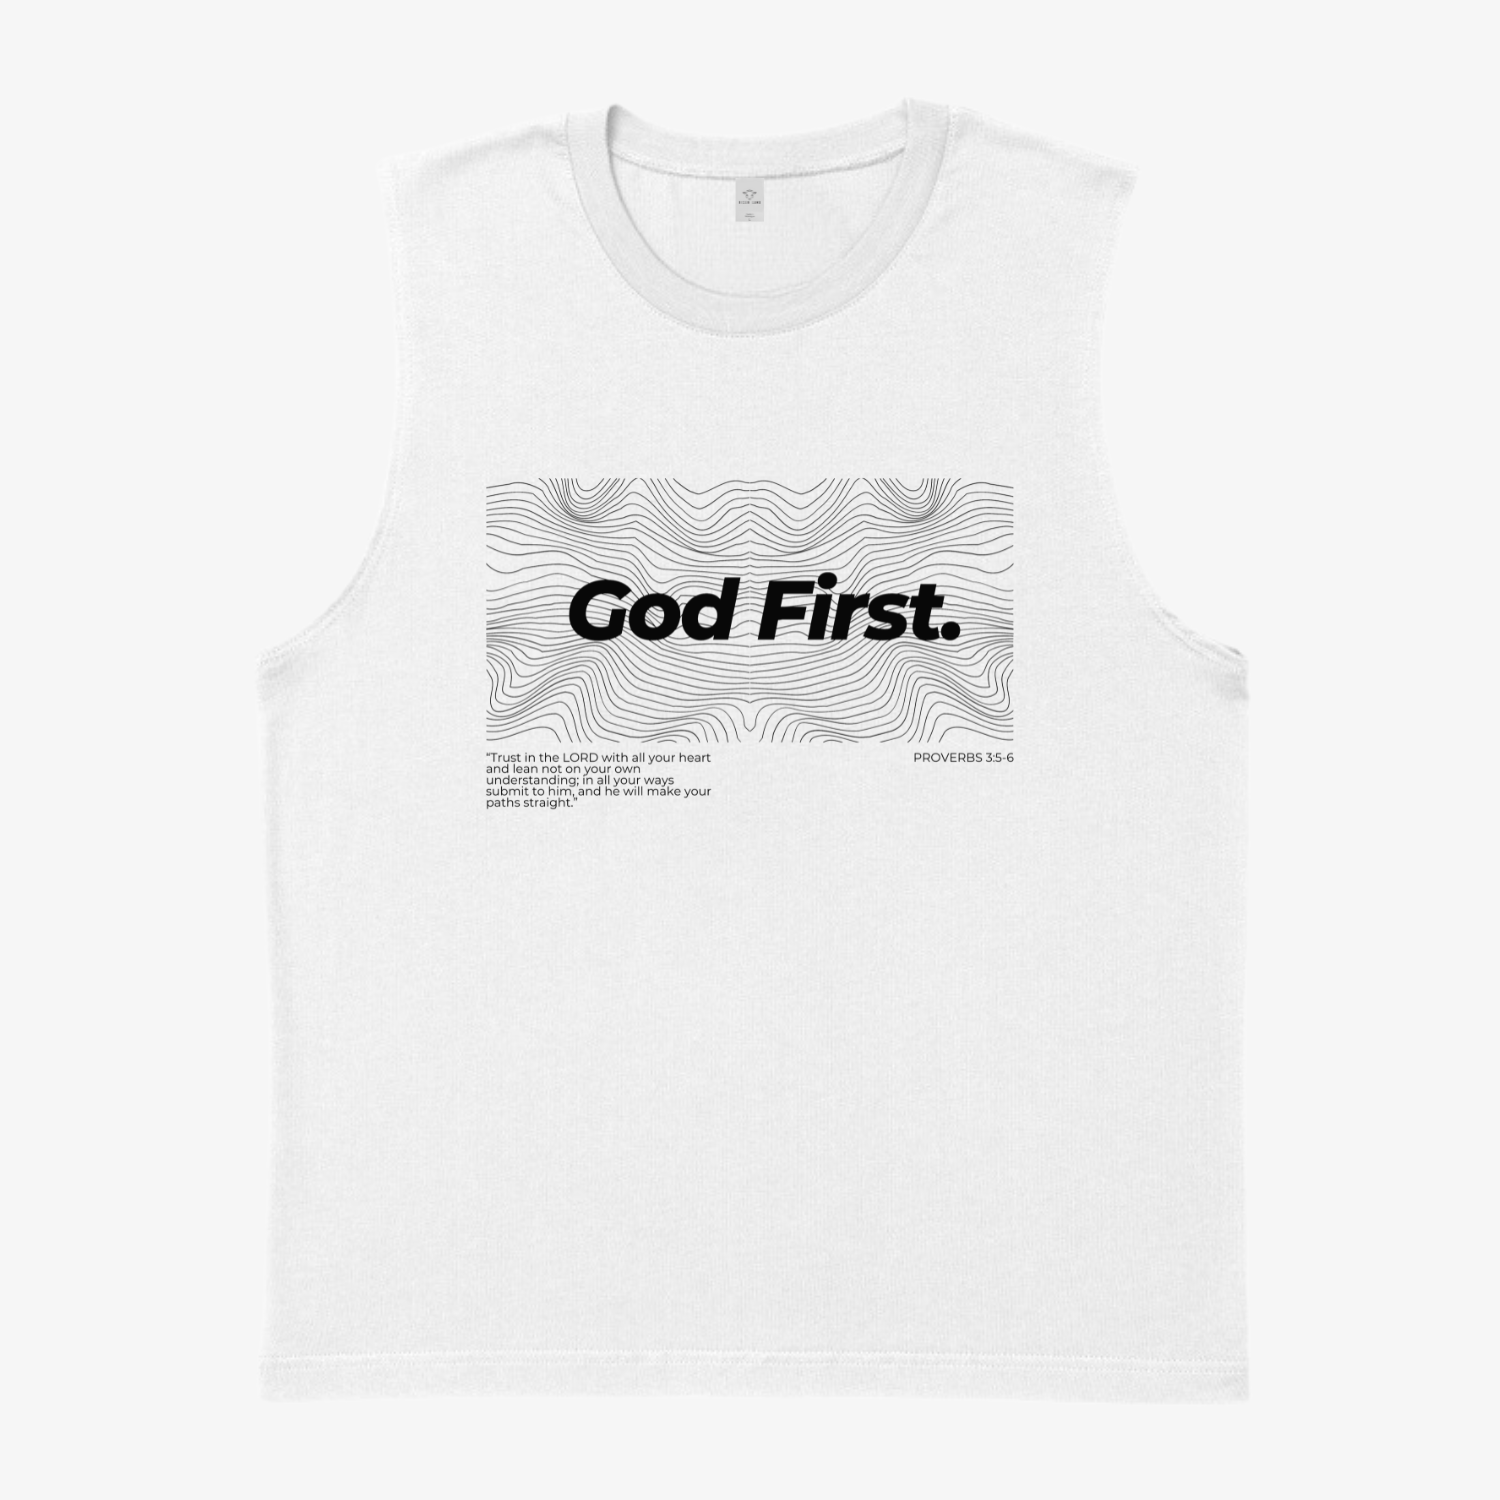 God First Muscle Tank